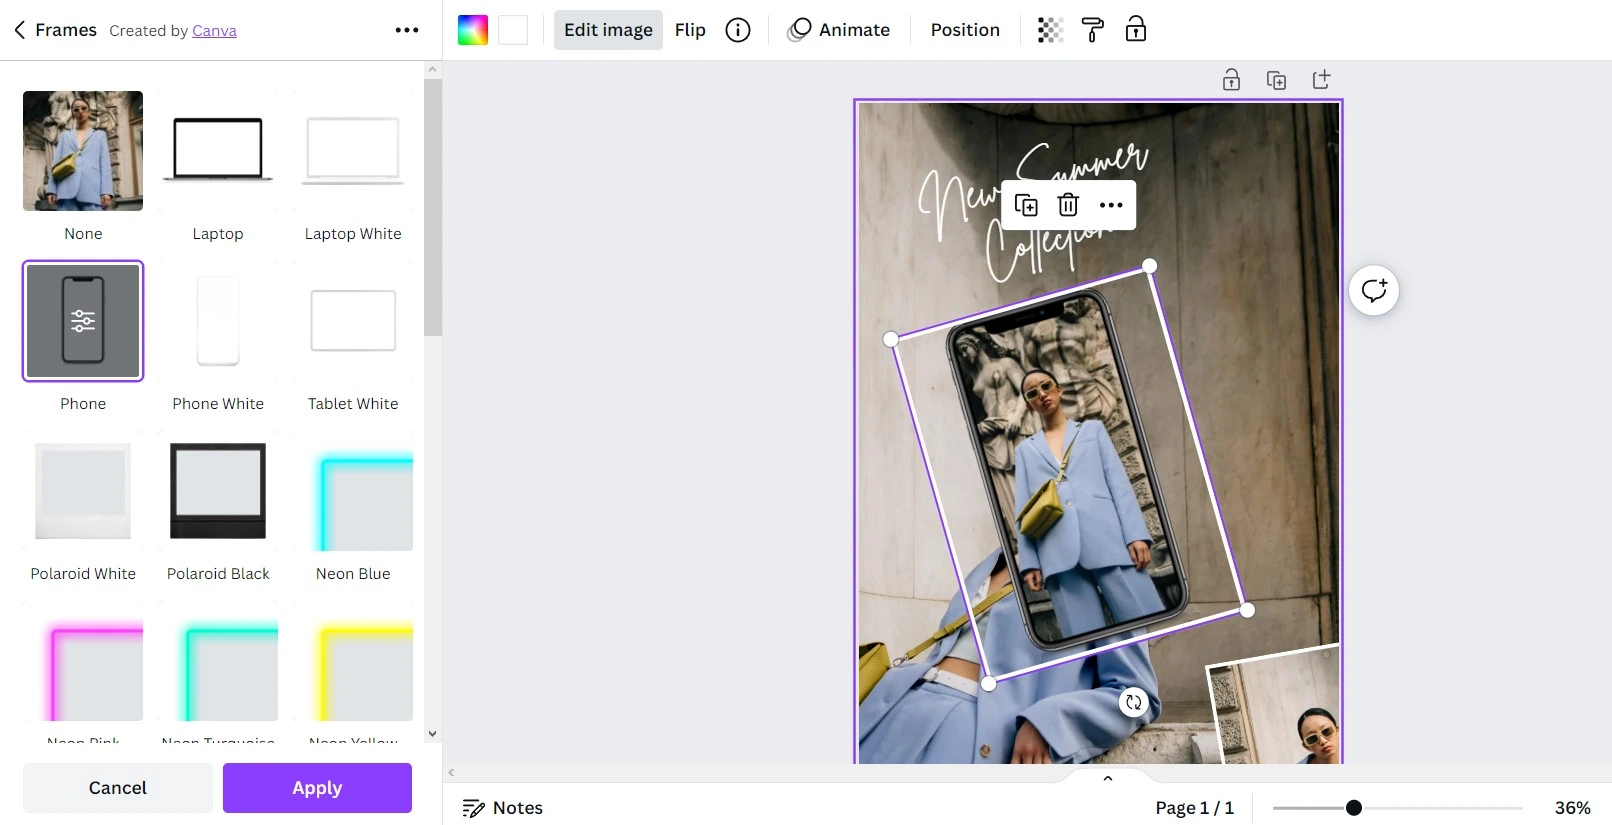 Canva lets you add frame to your images